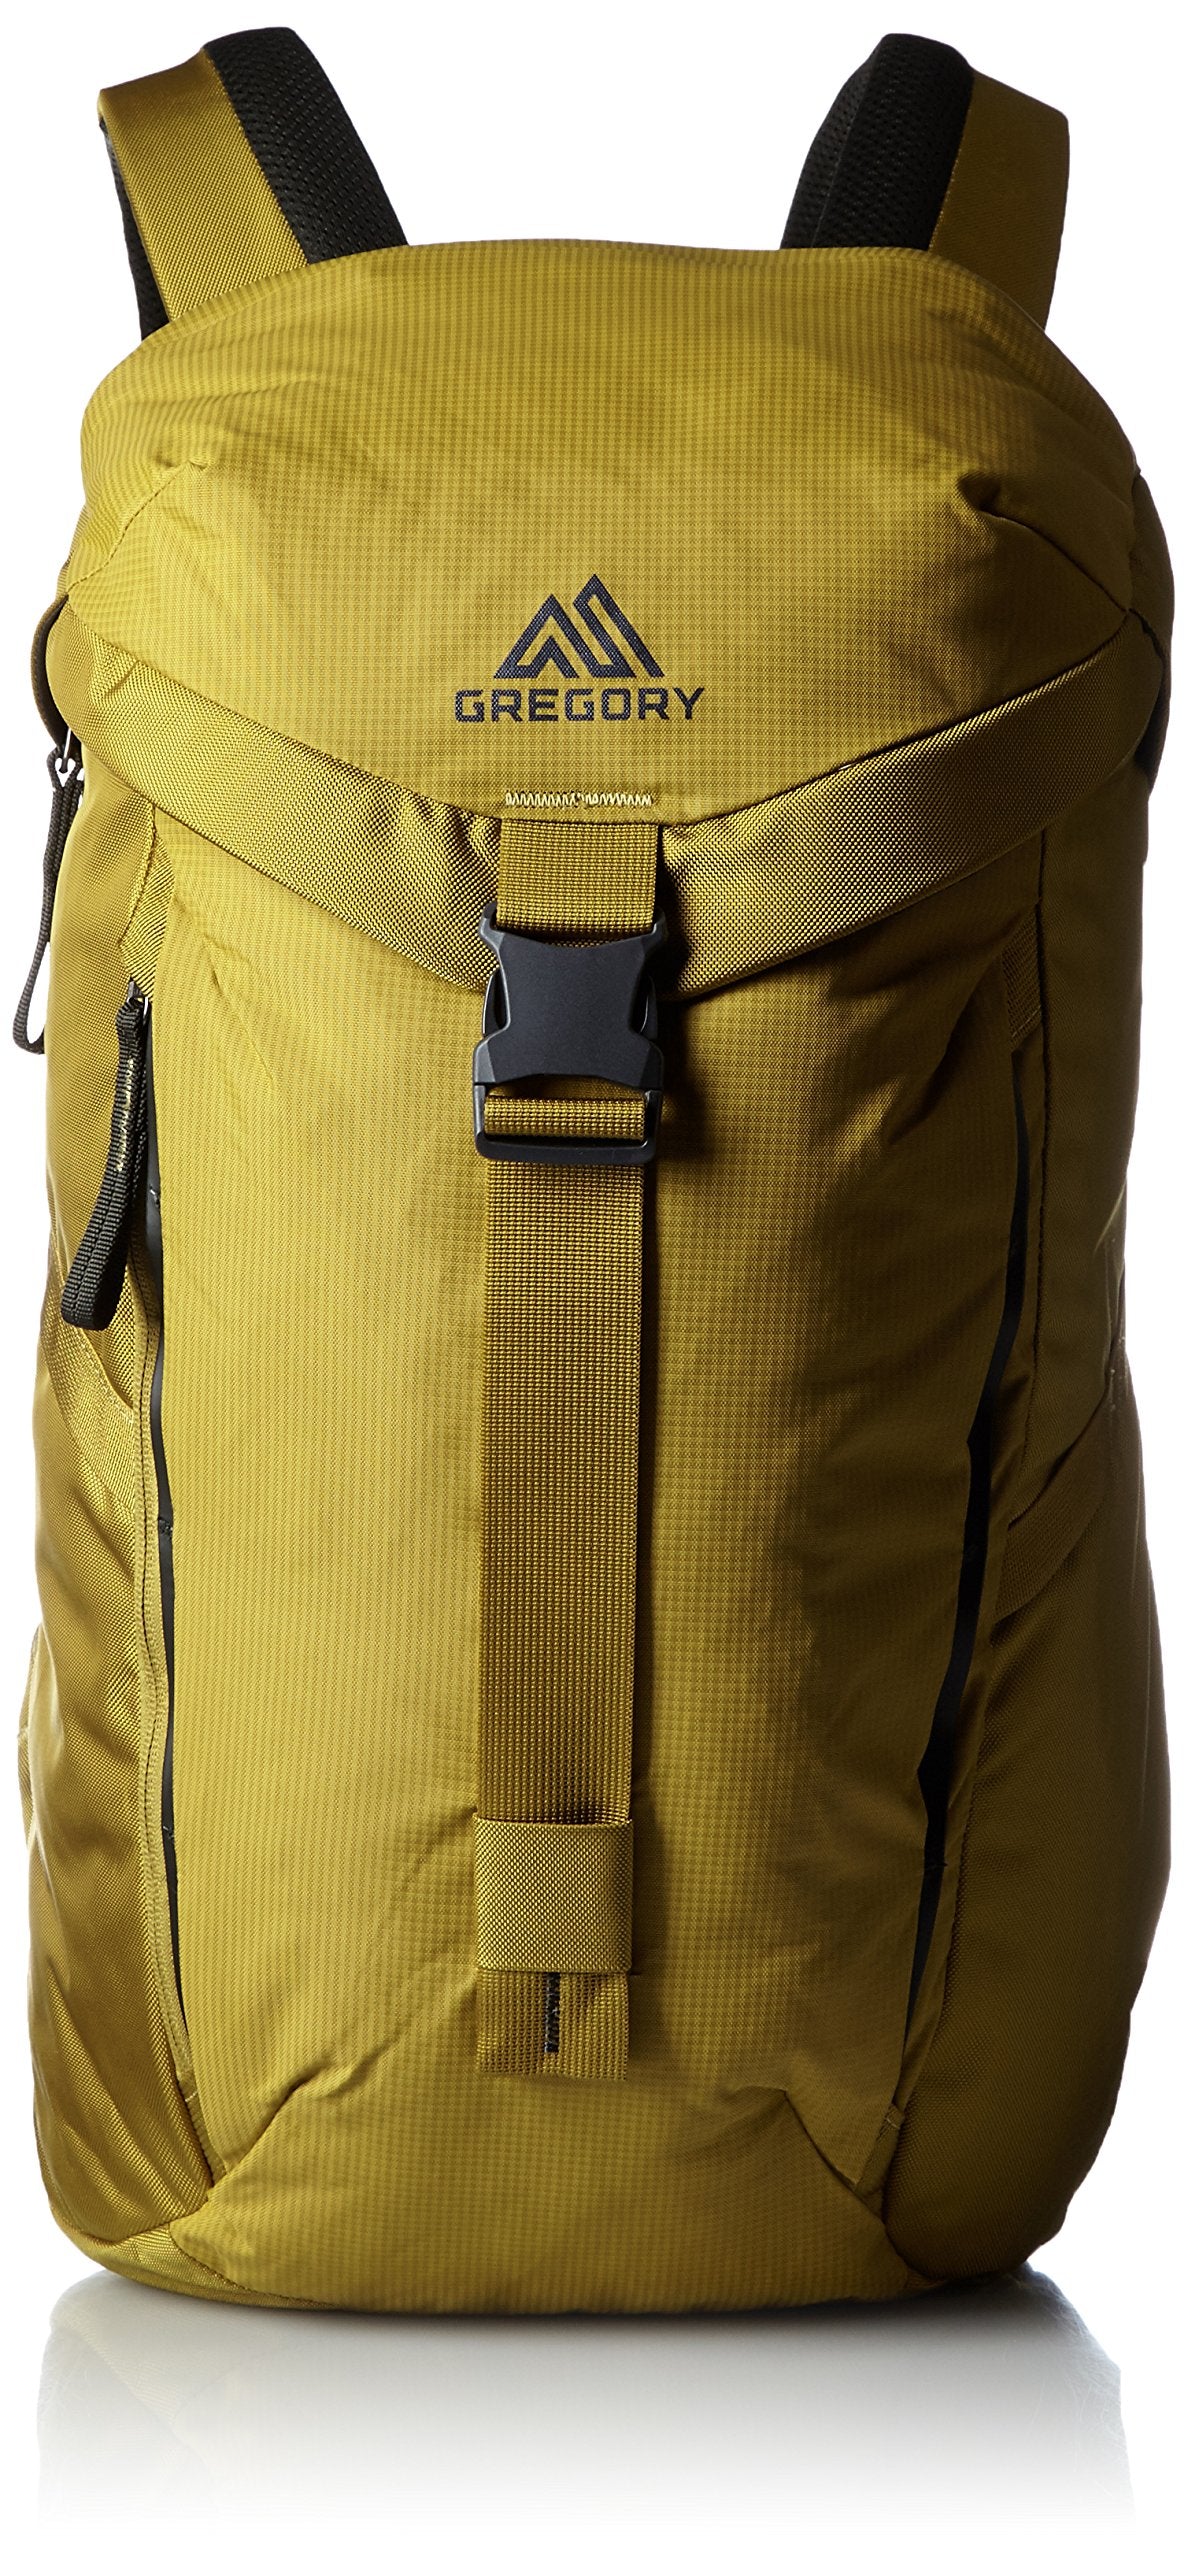 Gregory Mountain Products Sketch 28 Day Pack– backpacks4less.com